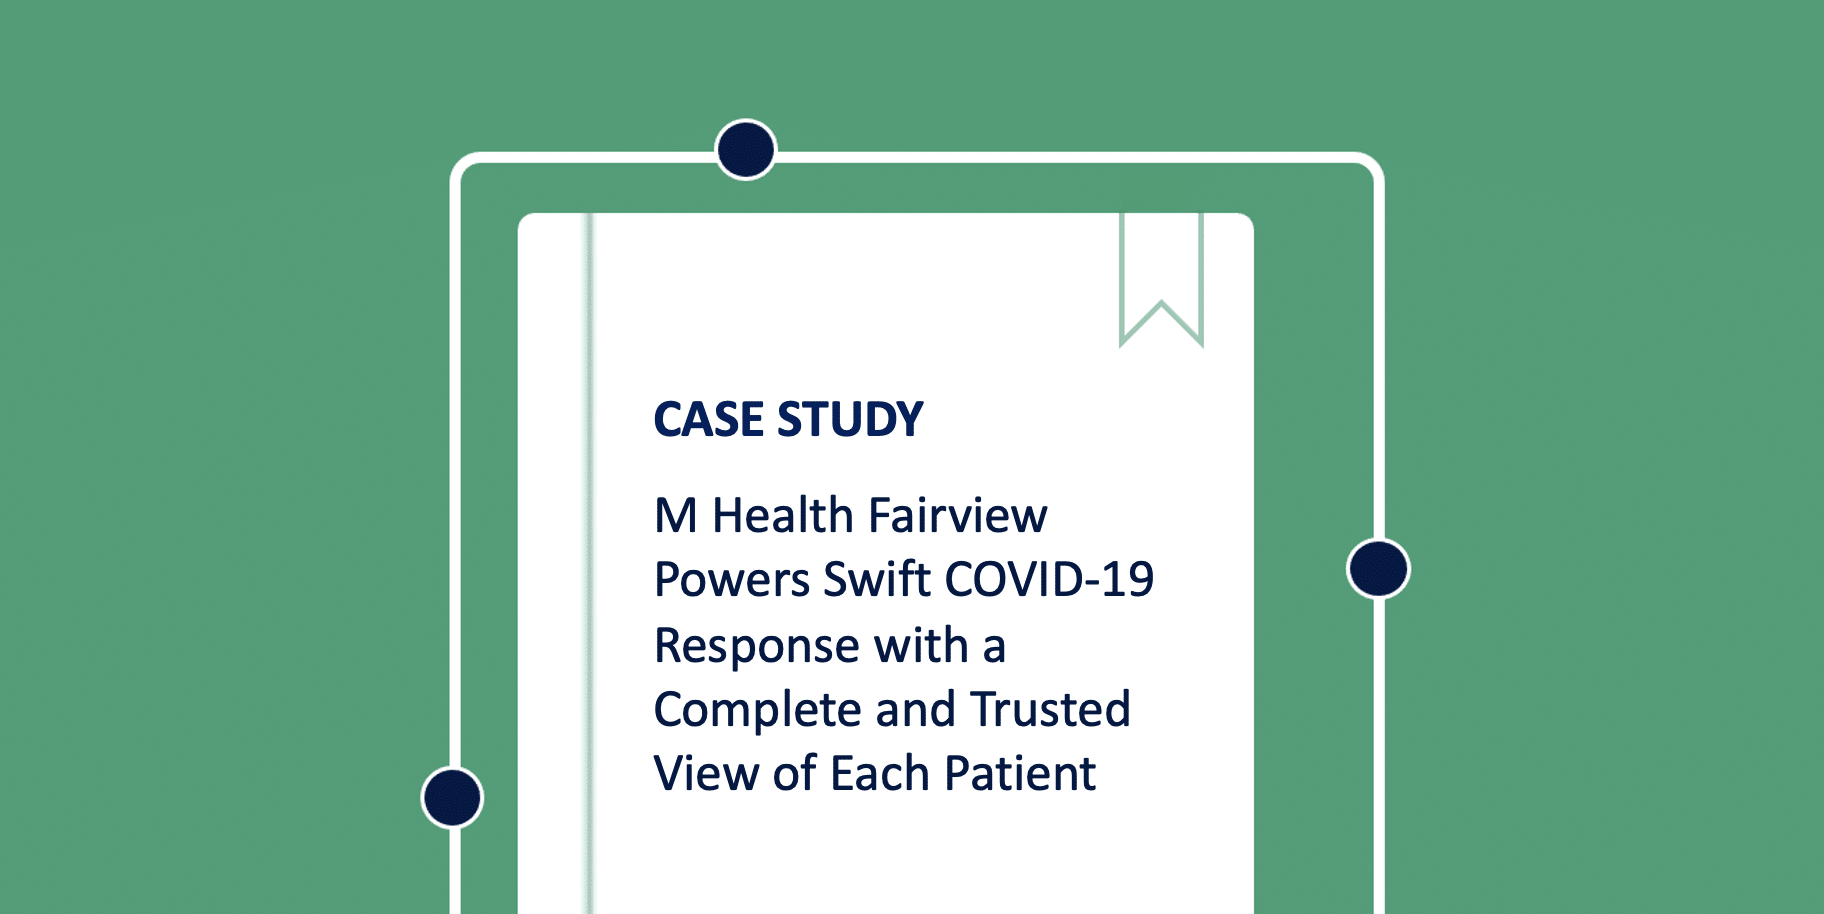 M Health Fairview Powers Swift COVID-19 Response with a Complete and Trusted View of Each Patient